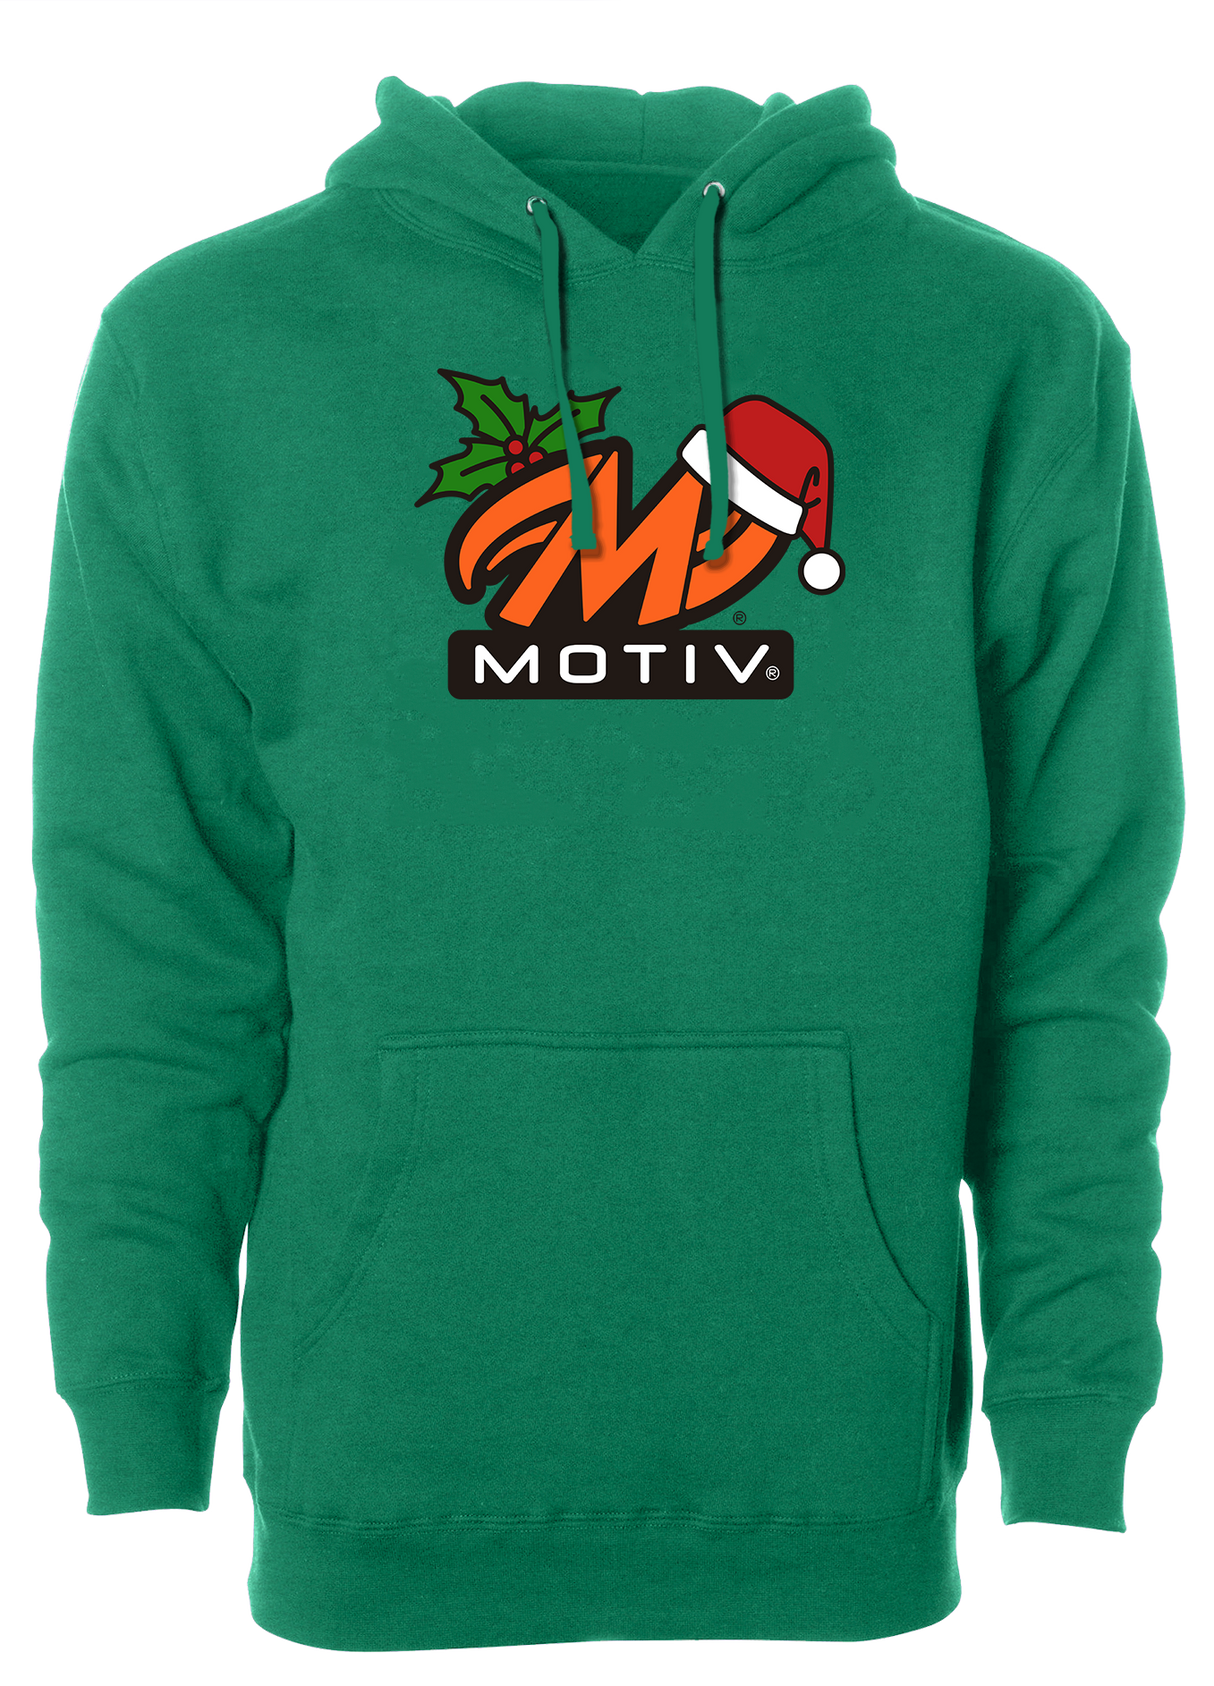 Tis' the season for MOTIV Christmas Hoodie. Show your Merriness on and off the lanes with the Motiv bowling Holiday T-shirt!  ugly t-shirt comes in red and black colors. Show your holiday spirit with this shirt that helps you hook the ball at your office party or night out with your friends!  Bowling gift holiday gift guide. Tee-shirt gift. Christmas Tree